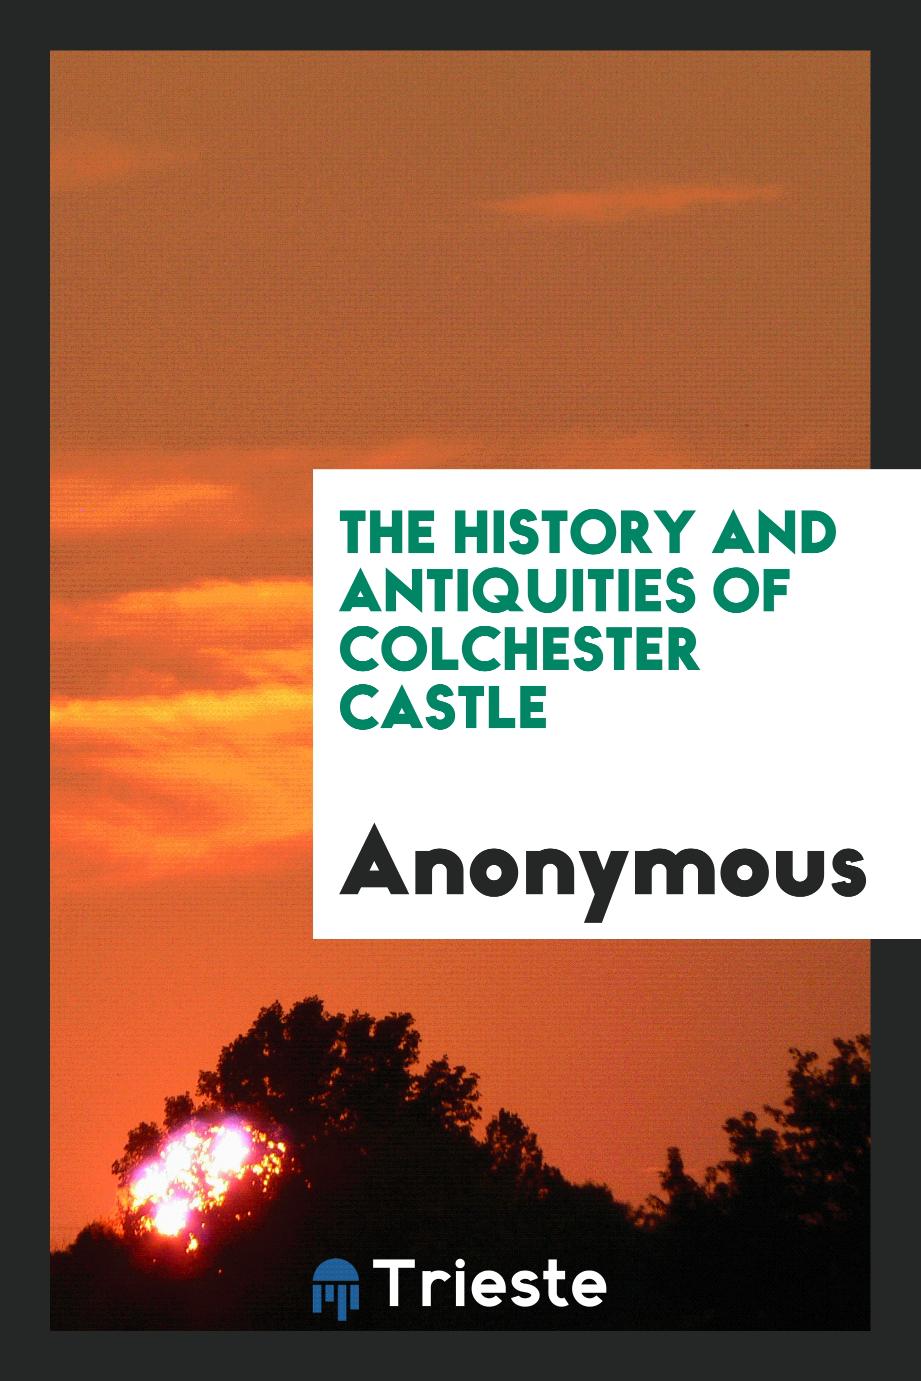 The History and Antiquities of Colchester Castle